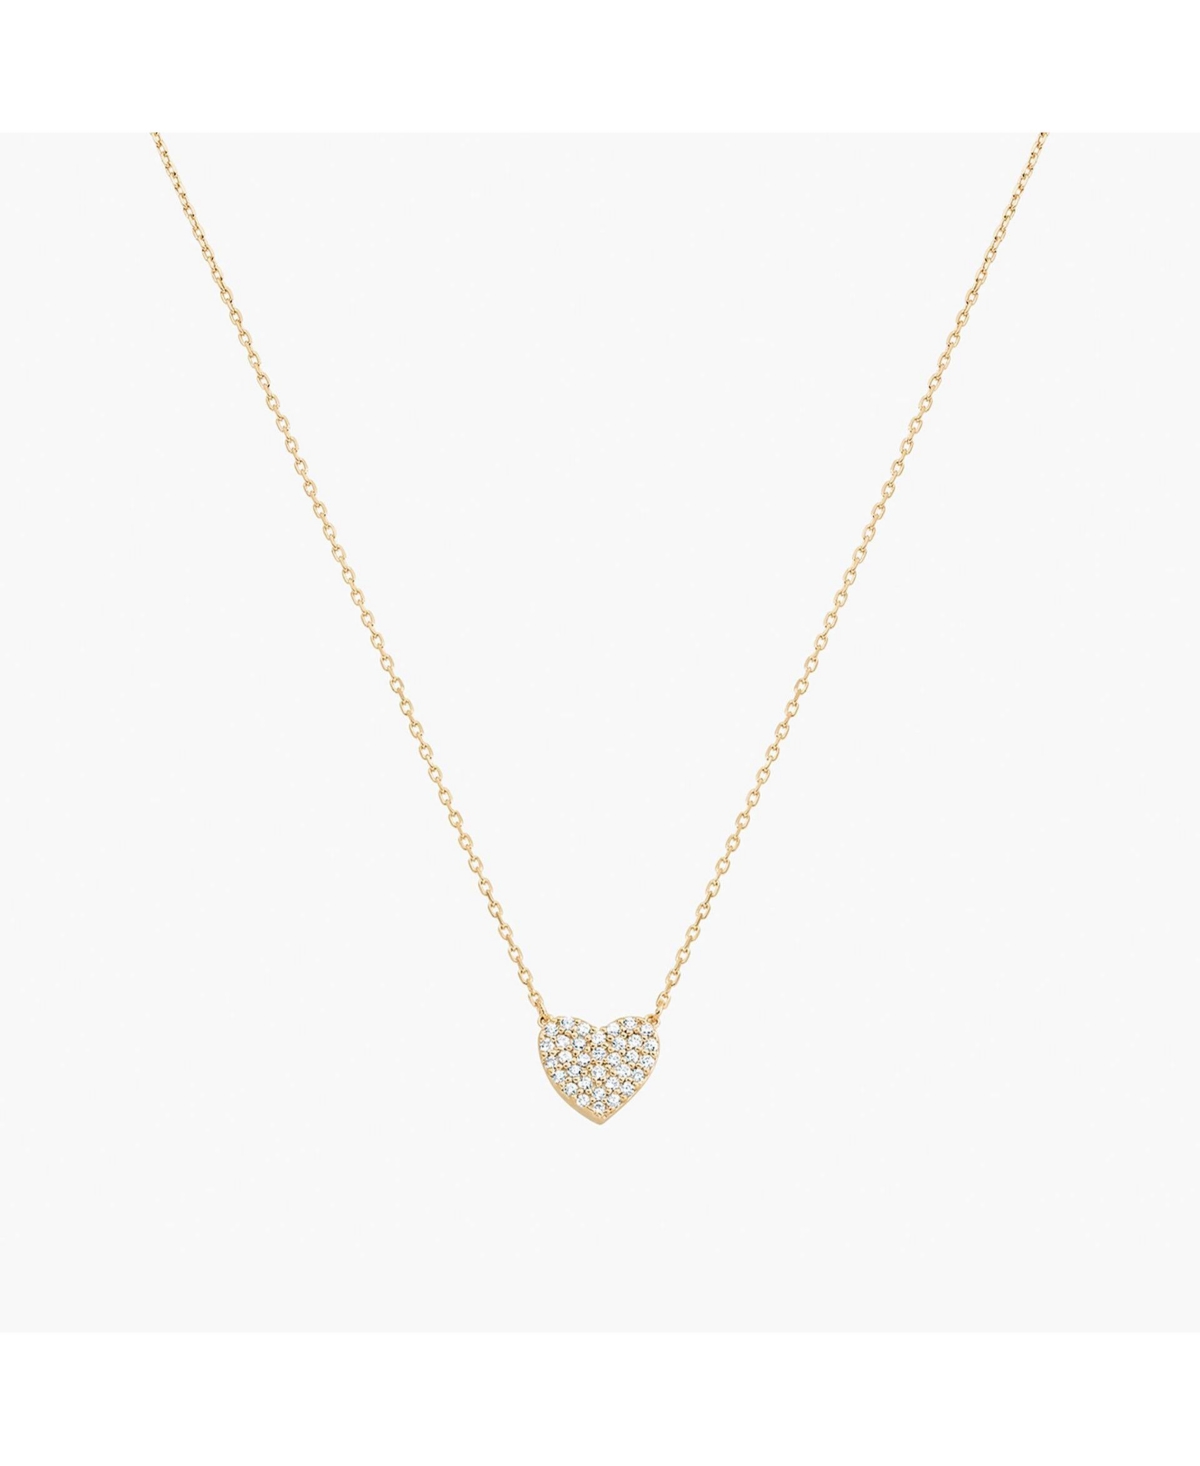 Crystal Heart Necklace - Yellow gold